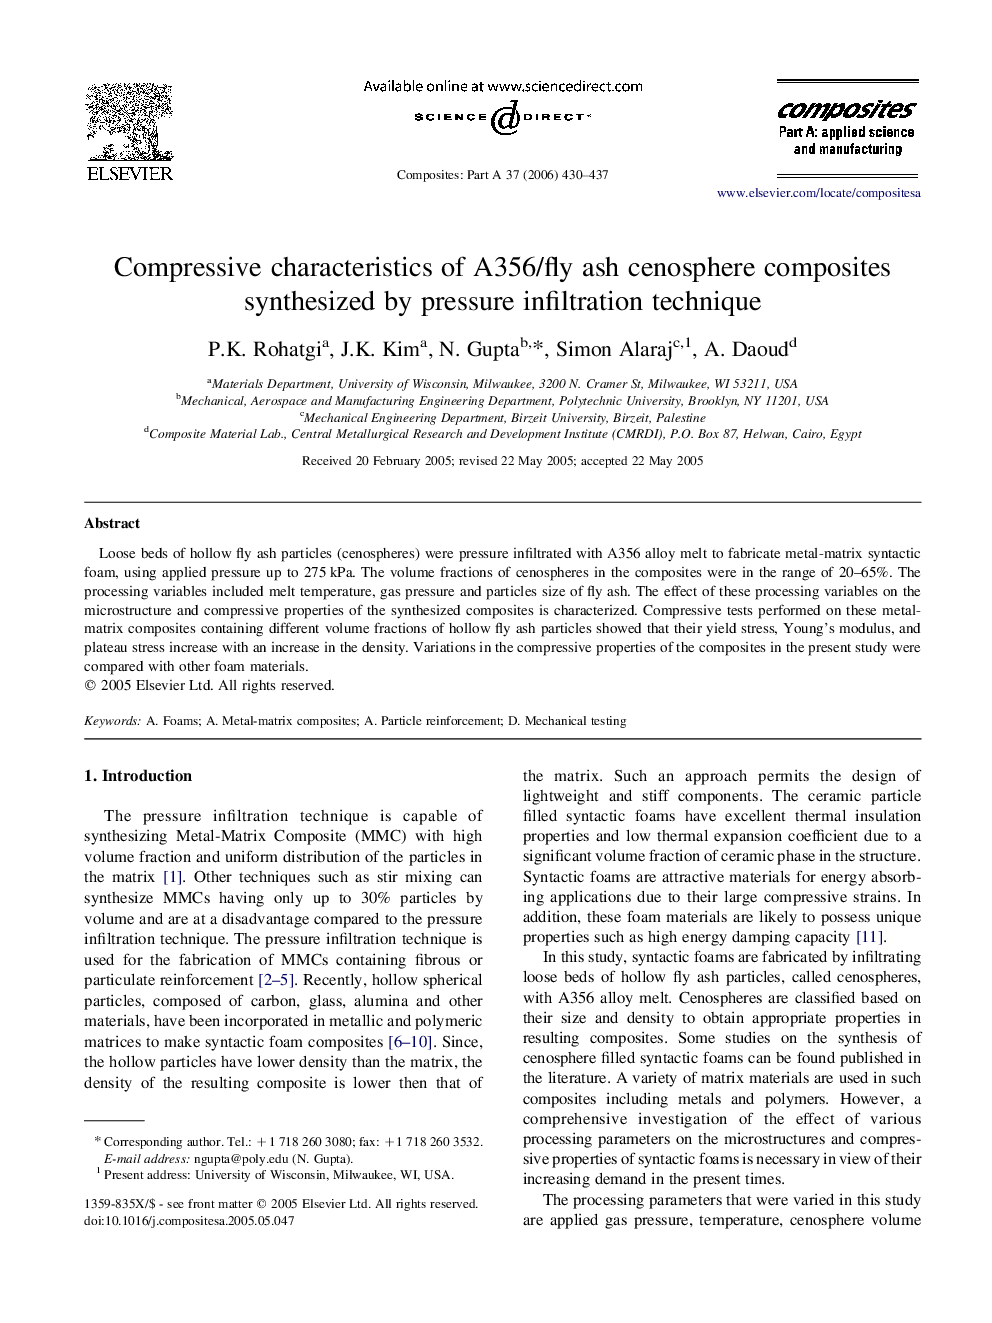 Compressive characteristics of A356/fly ash cenosphere composites synthesized by pressure infiltration technique